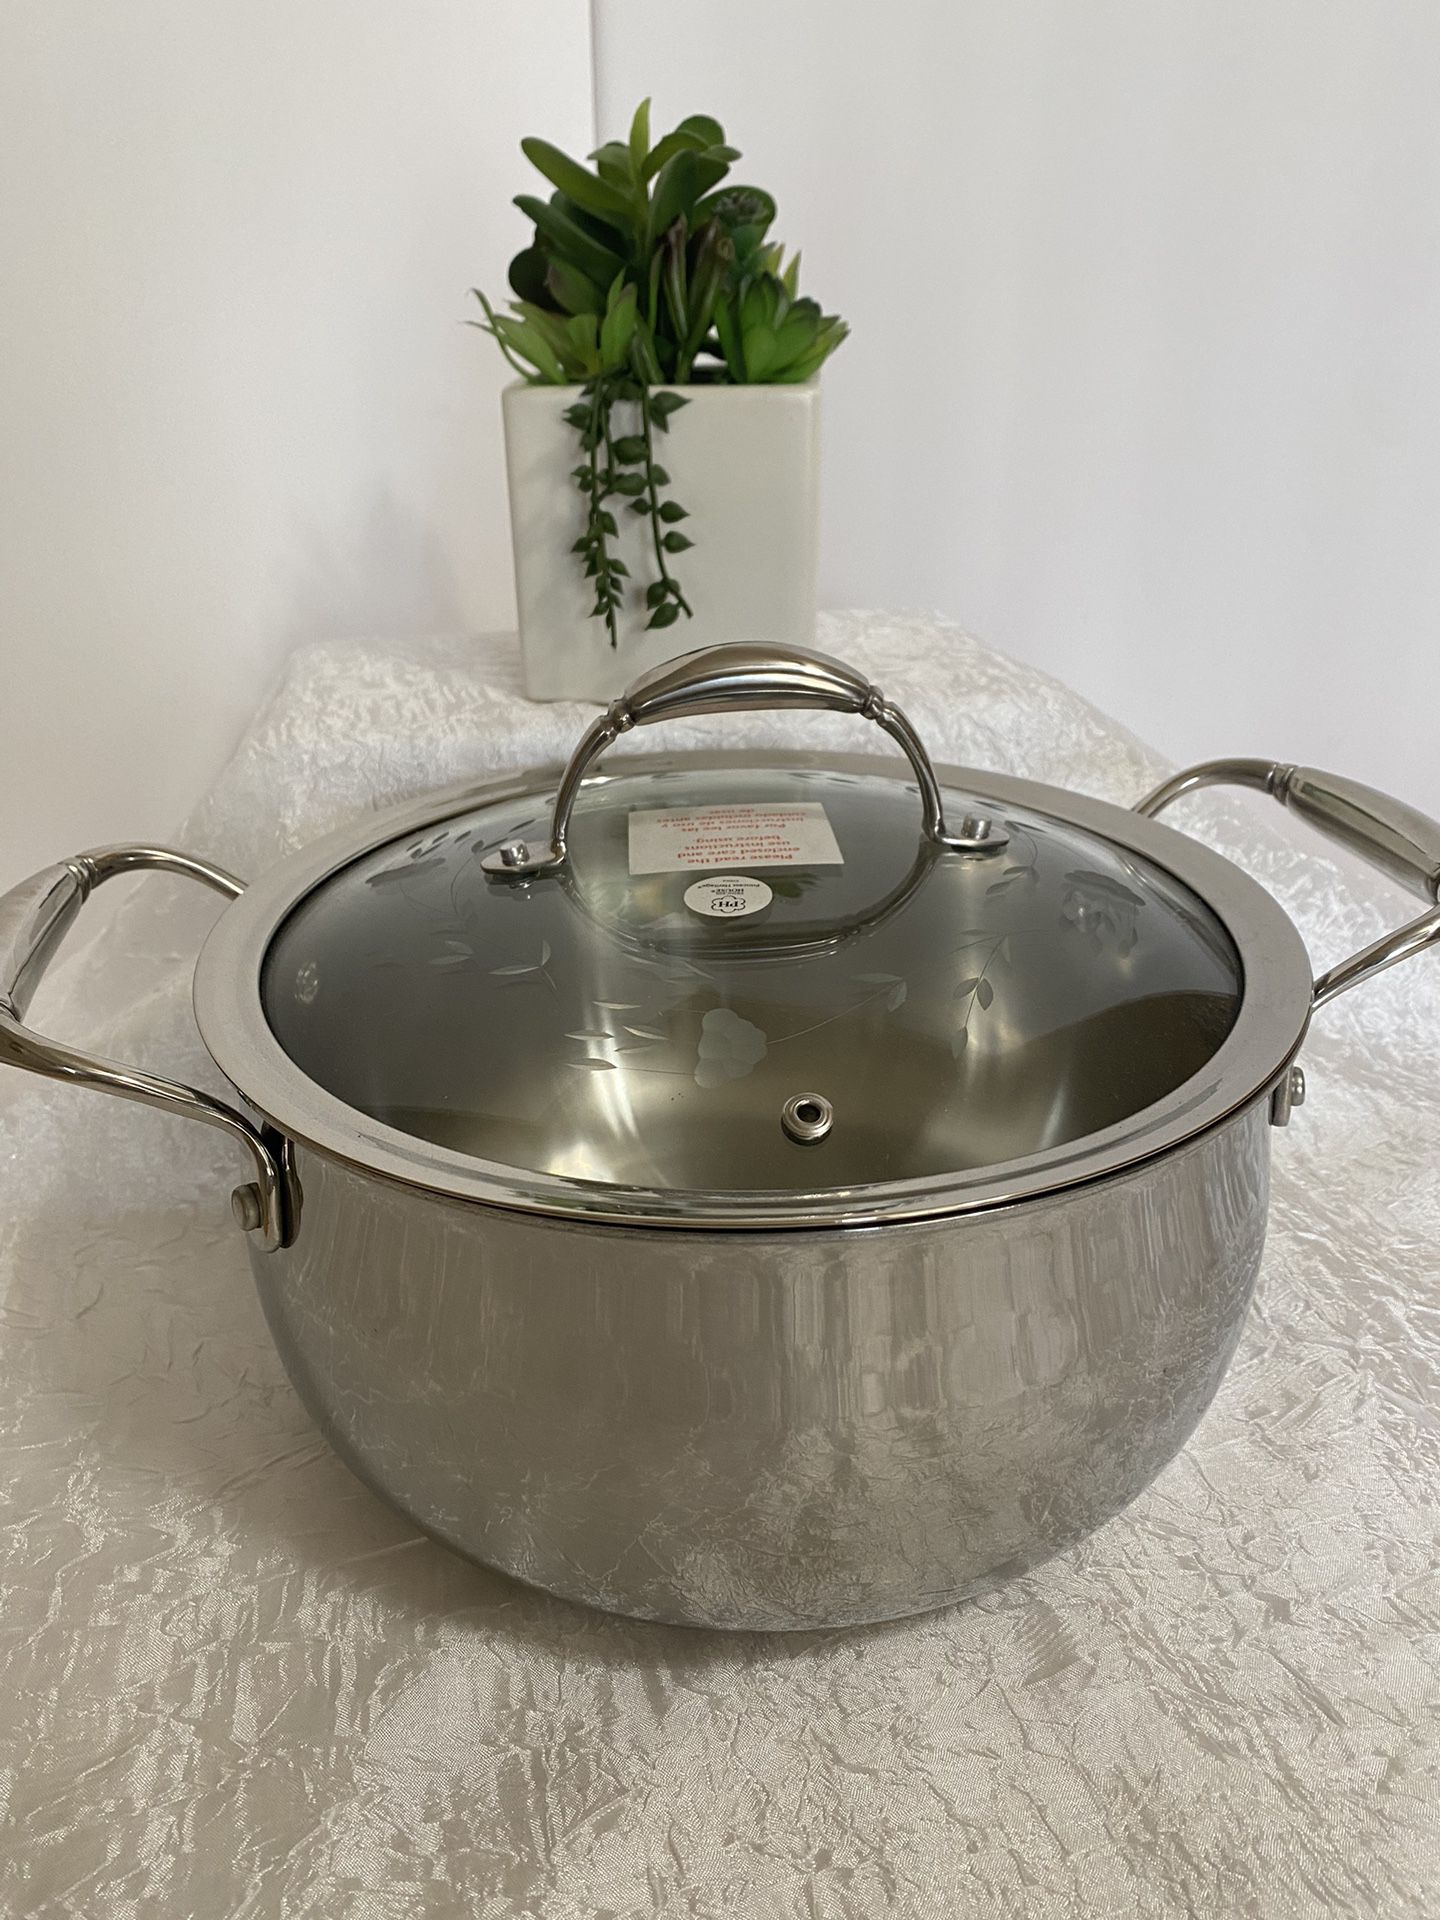 PRINCESS HERITAGE® 6 QT. TRI-PLY STAINLESS STE $180